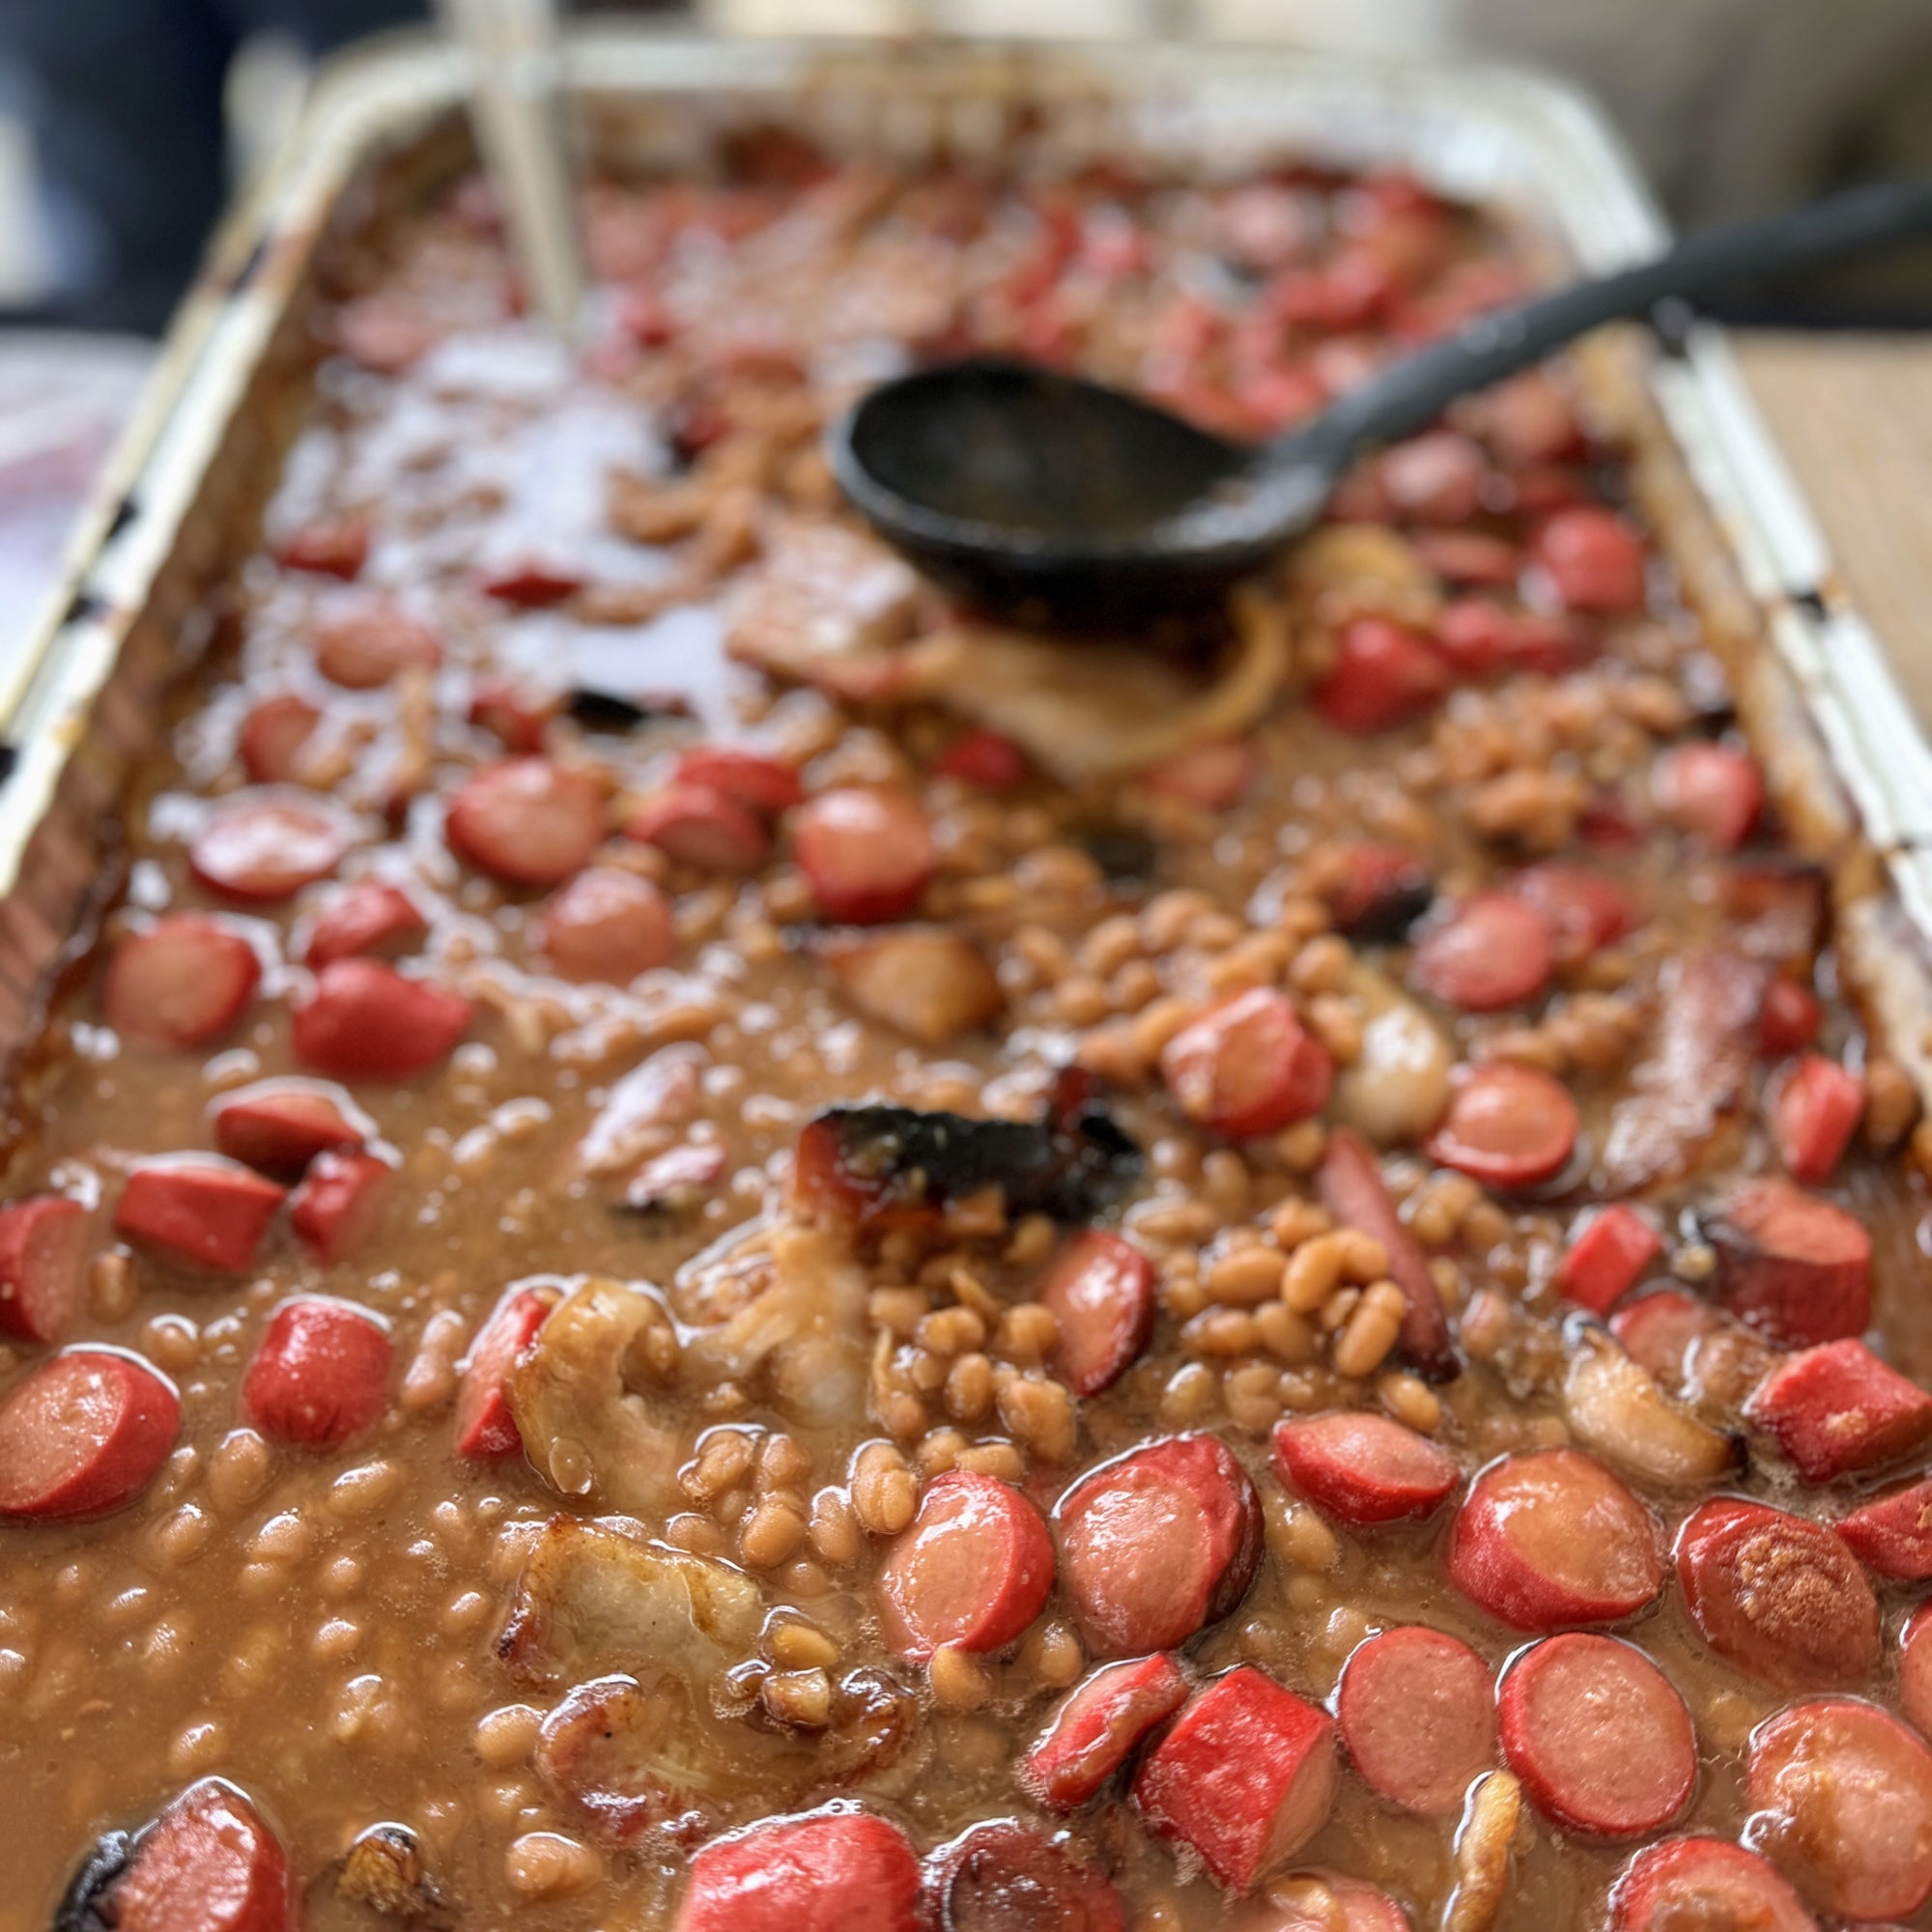 Bright Leaf Barbecue Baked Beans with Hot Dogs and Bacon